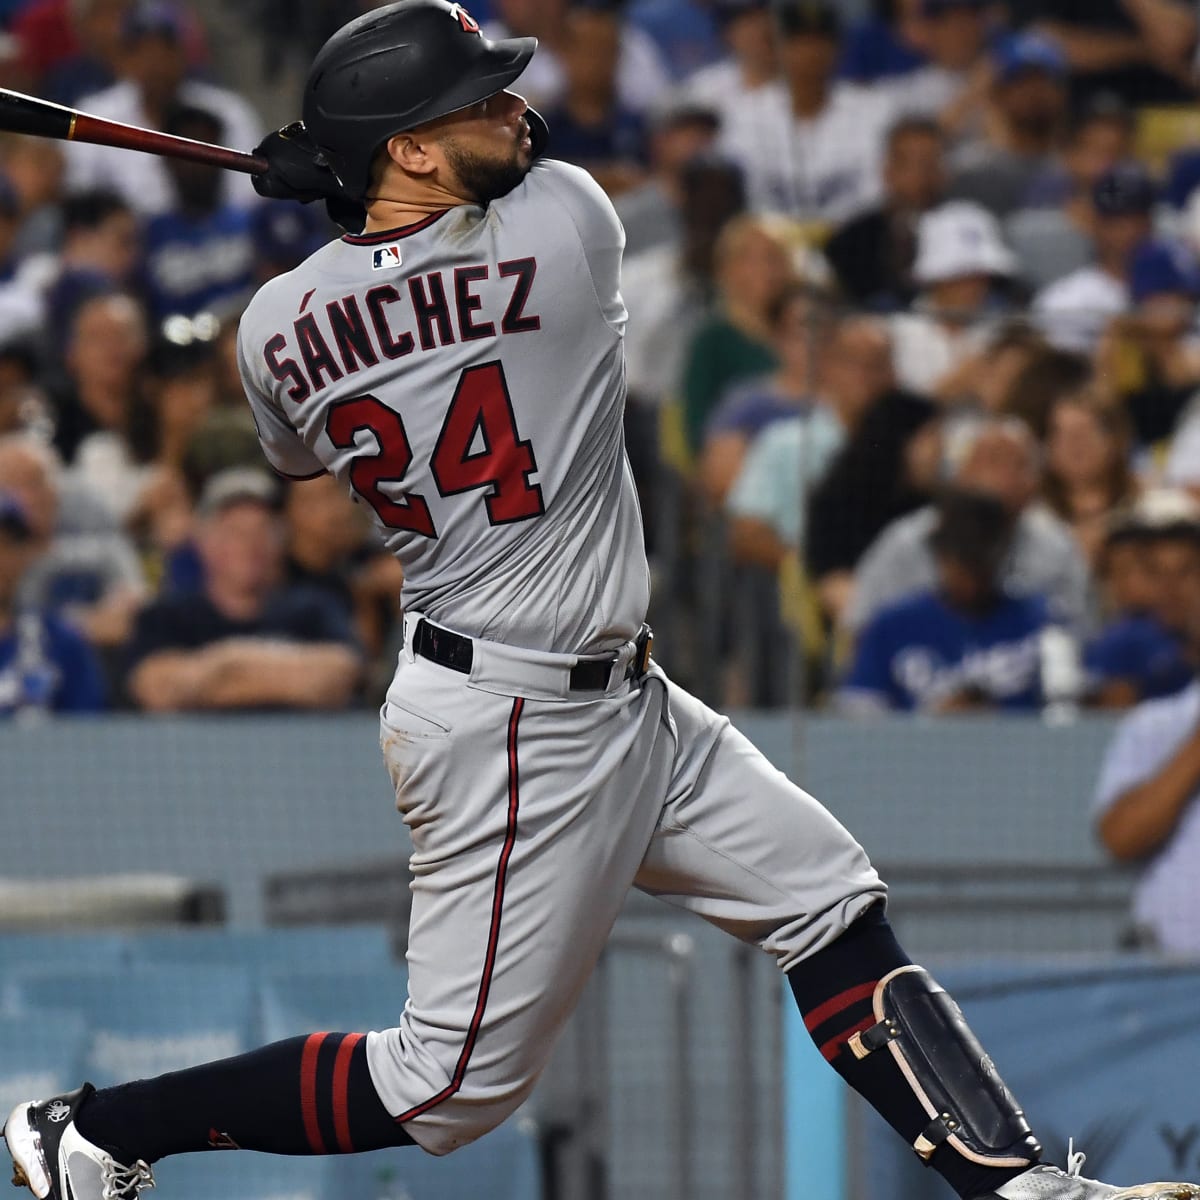 Report: Mets Adding Gary Sánchez to Major League Roster